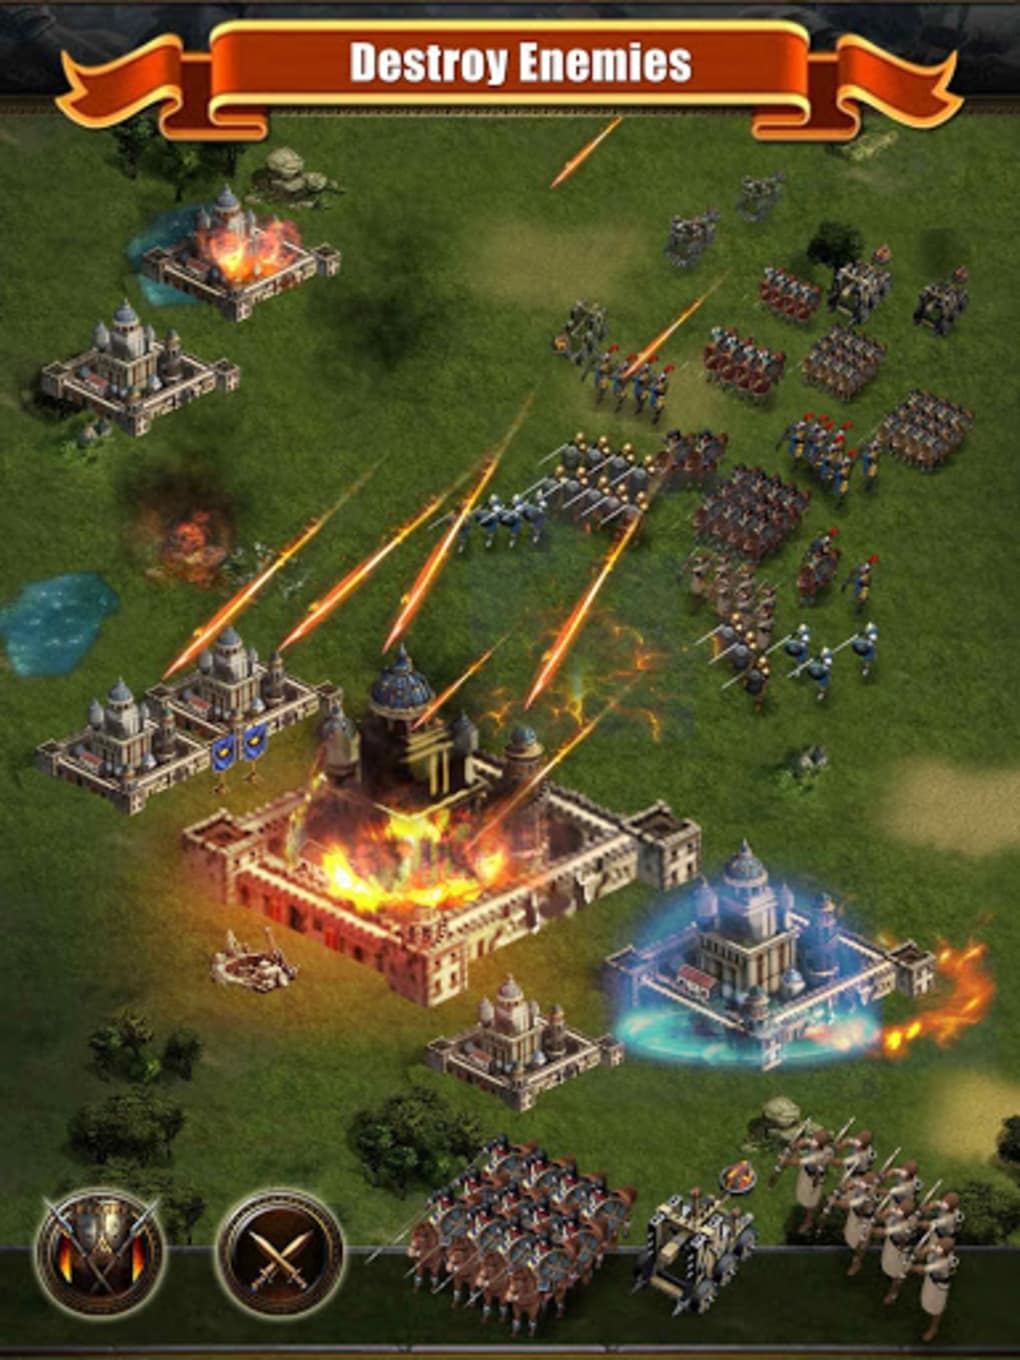 Clash of Kingdoms Review  OSG1: Best Place for Online Strategy Games